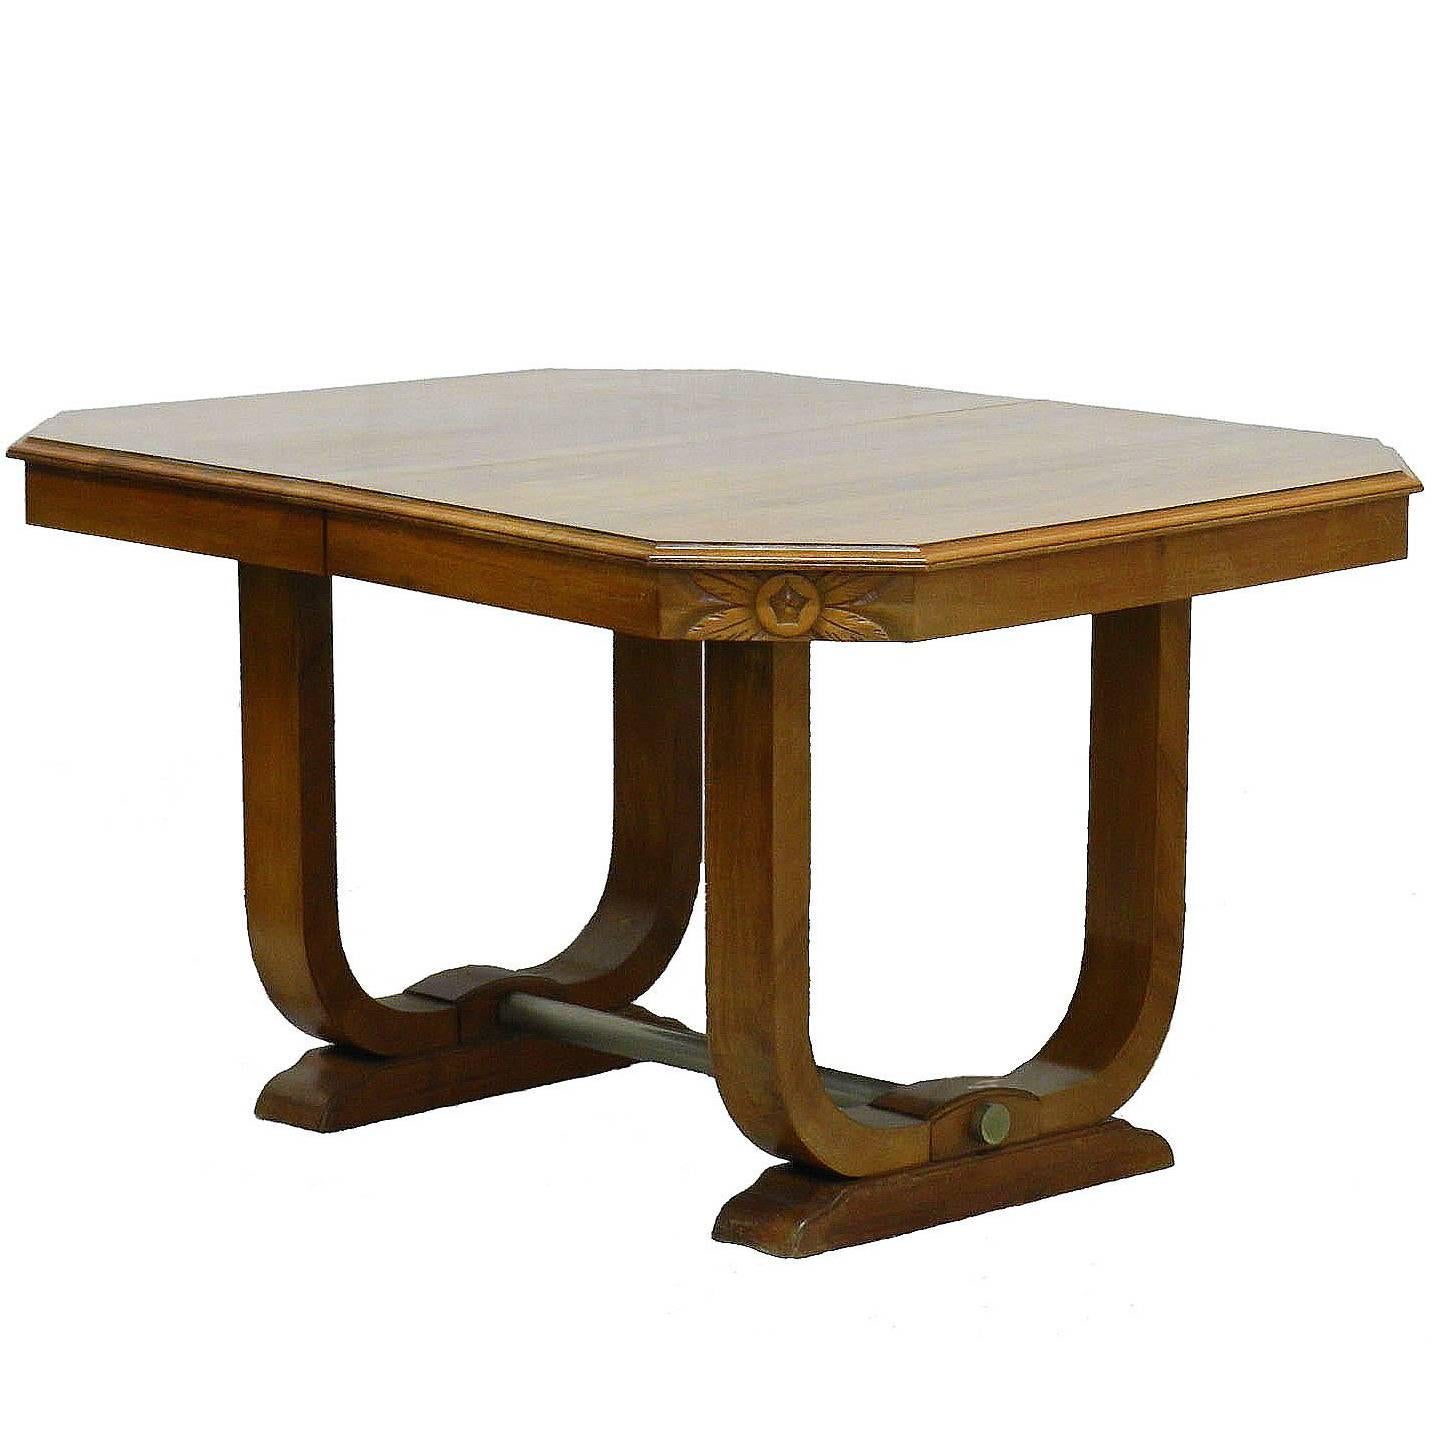 Art Deco Dining Table French circa 1930 Sue et Mare Style Desk or Center Table For Sale